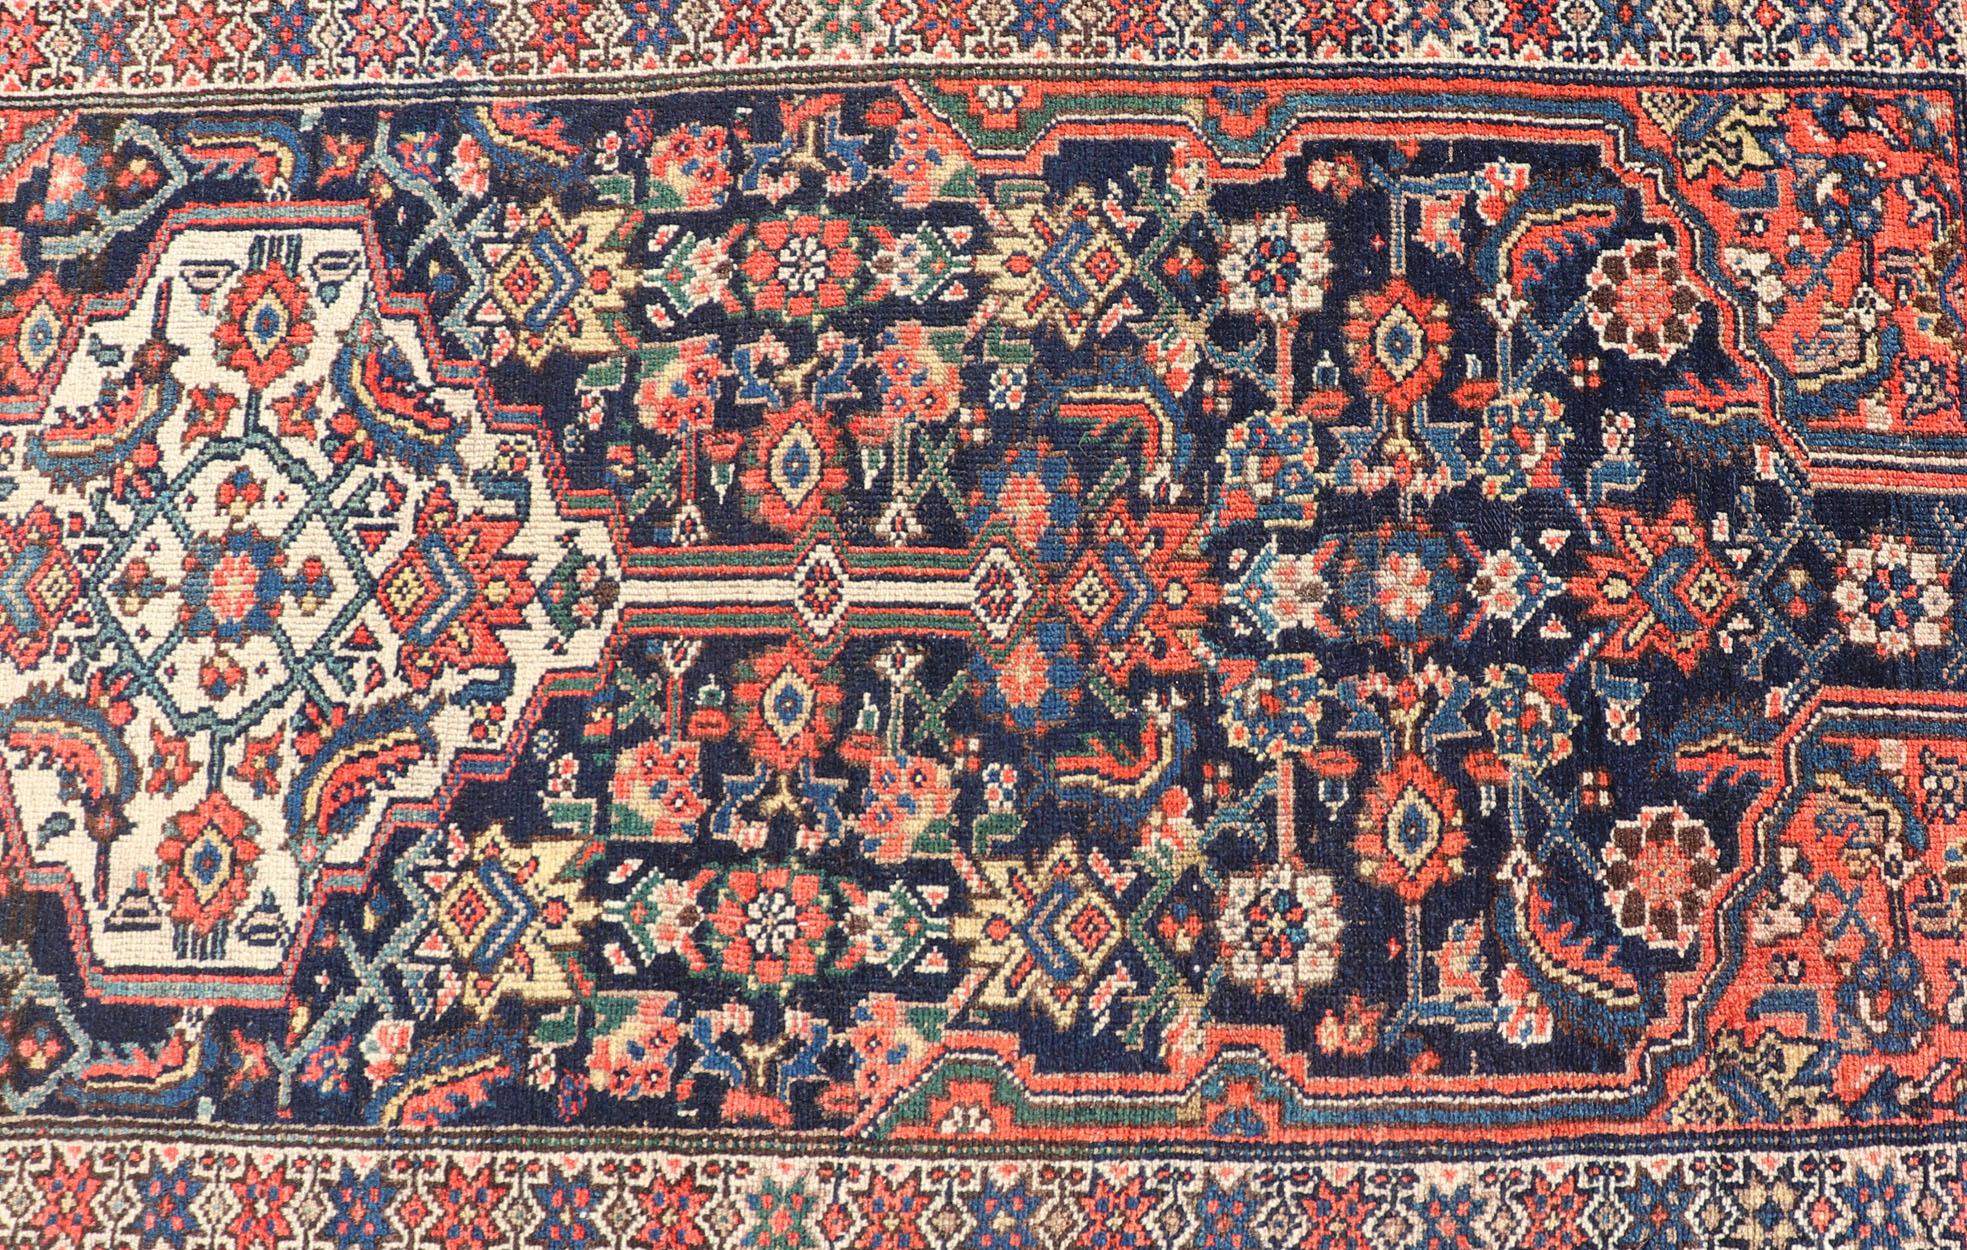 Antique Malayer Runner, rug PTA-21016, country of origin / type: Persian / Malayer, circa Early-20th Century.

Measures: 3'4'' x 16'0''.

This magnificent antique Persian Malayer, woven in the 1920s, features a stunning tri-medallion design upon